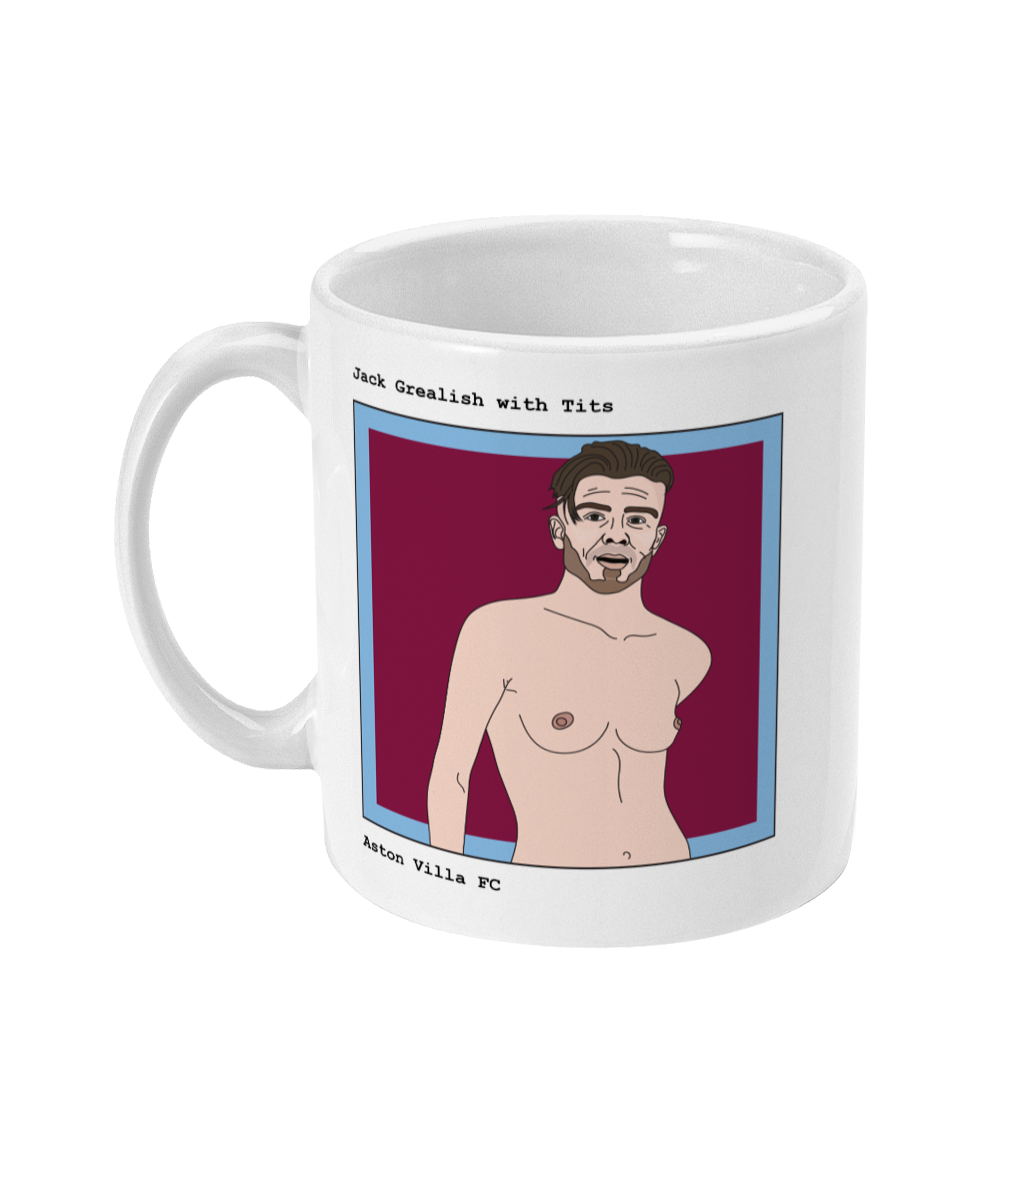 Jack Grealish with Tits - Footballers with Tits